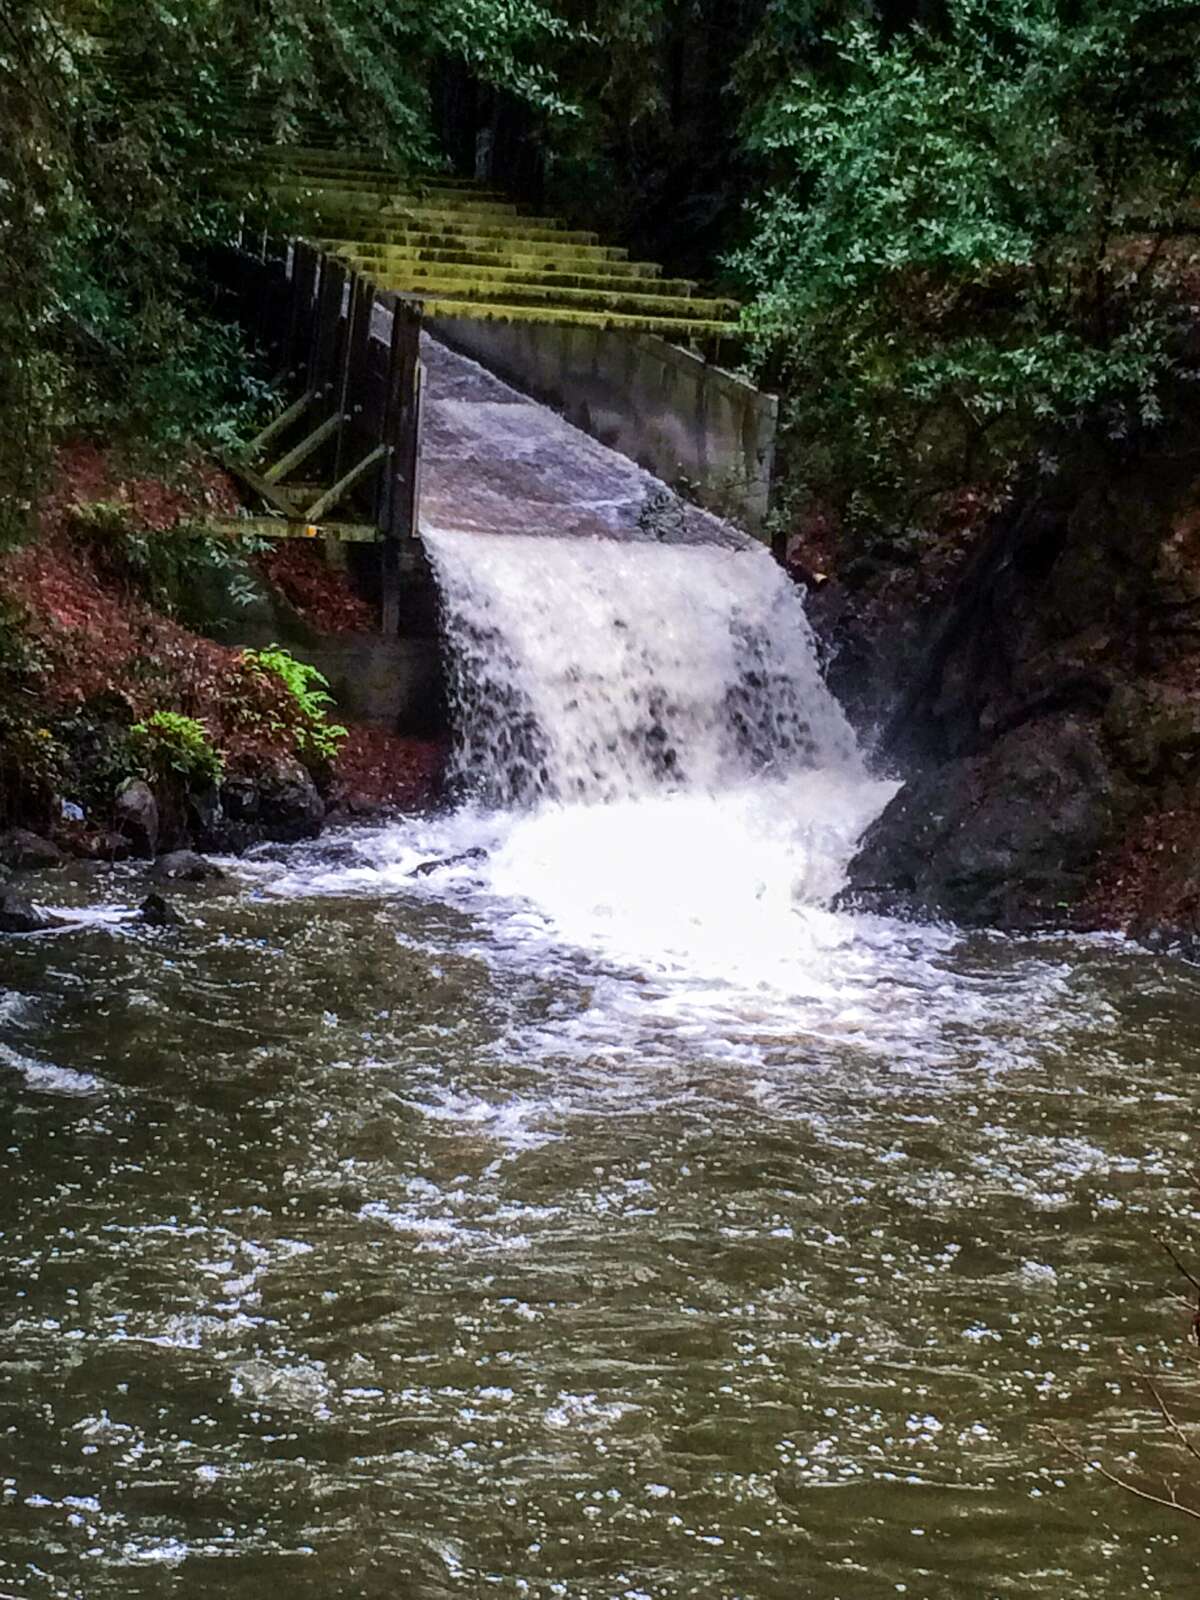 Lake Lagunitas, the smallest and oldest reservoir in the Mount Tamalpais watershed, reached full capacity in Jan. 2016 and water began flowing over the spillway. 